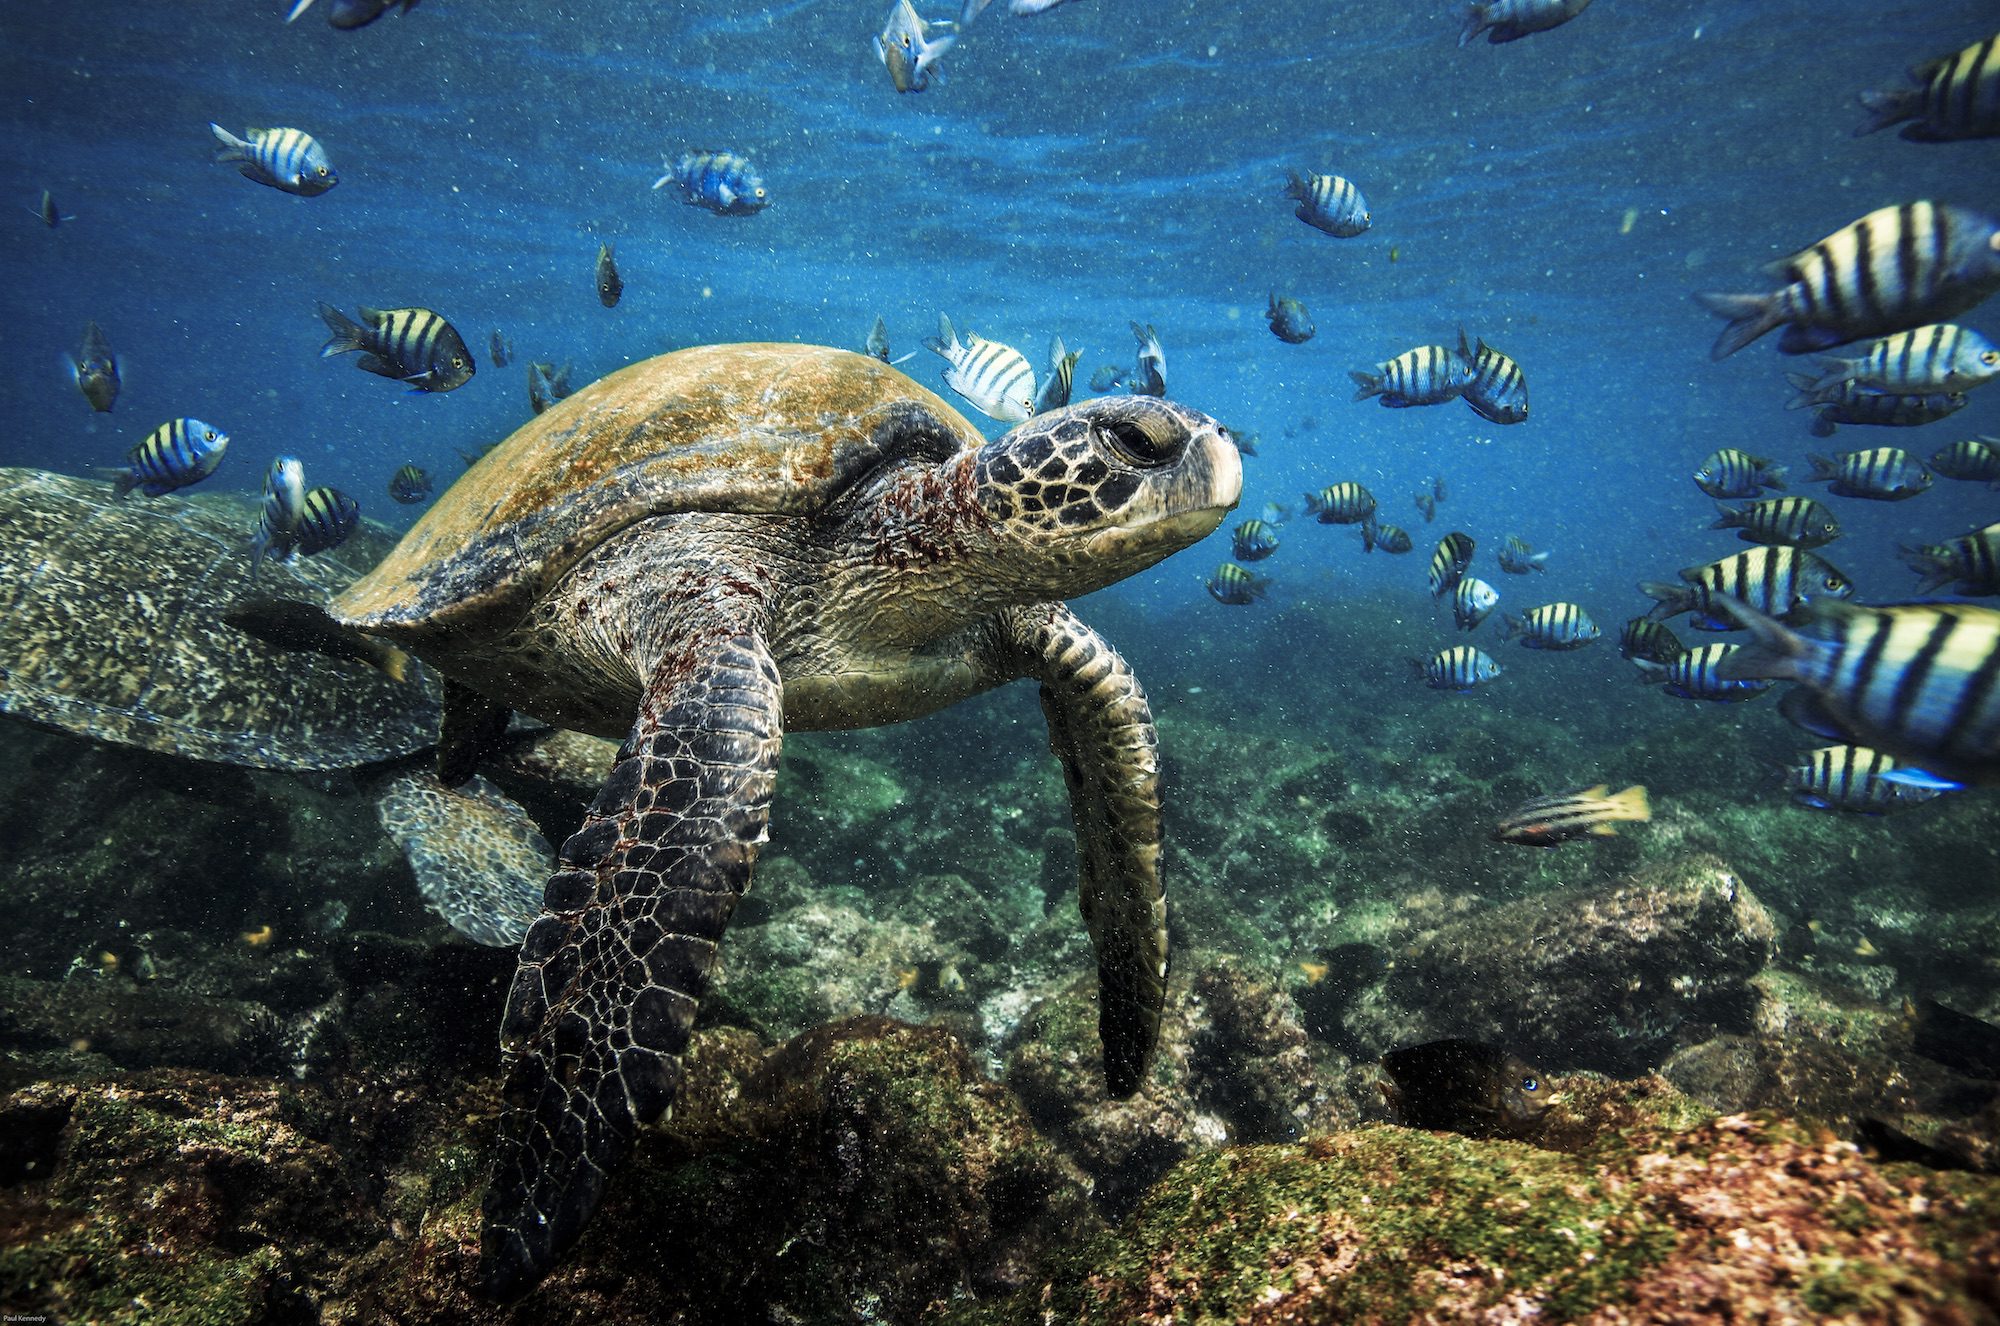 An adventurer’s guide to Ecuador: Swimming with sea turtles to conquering volcanoes